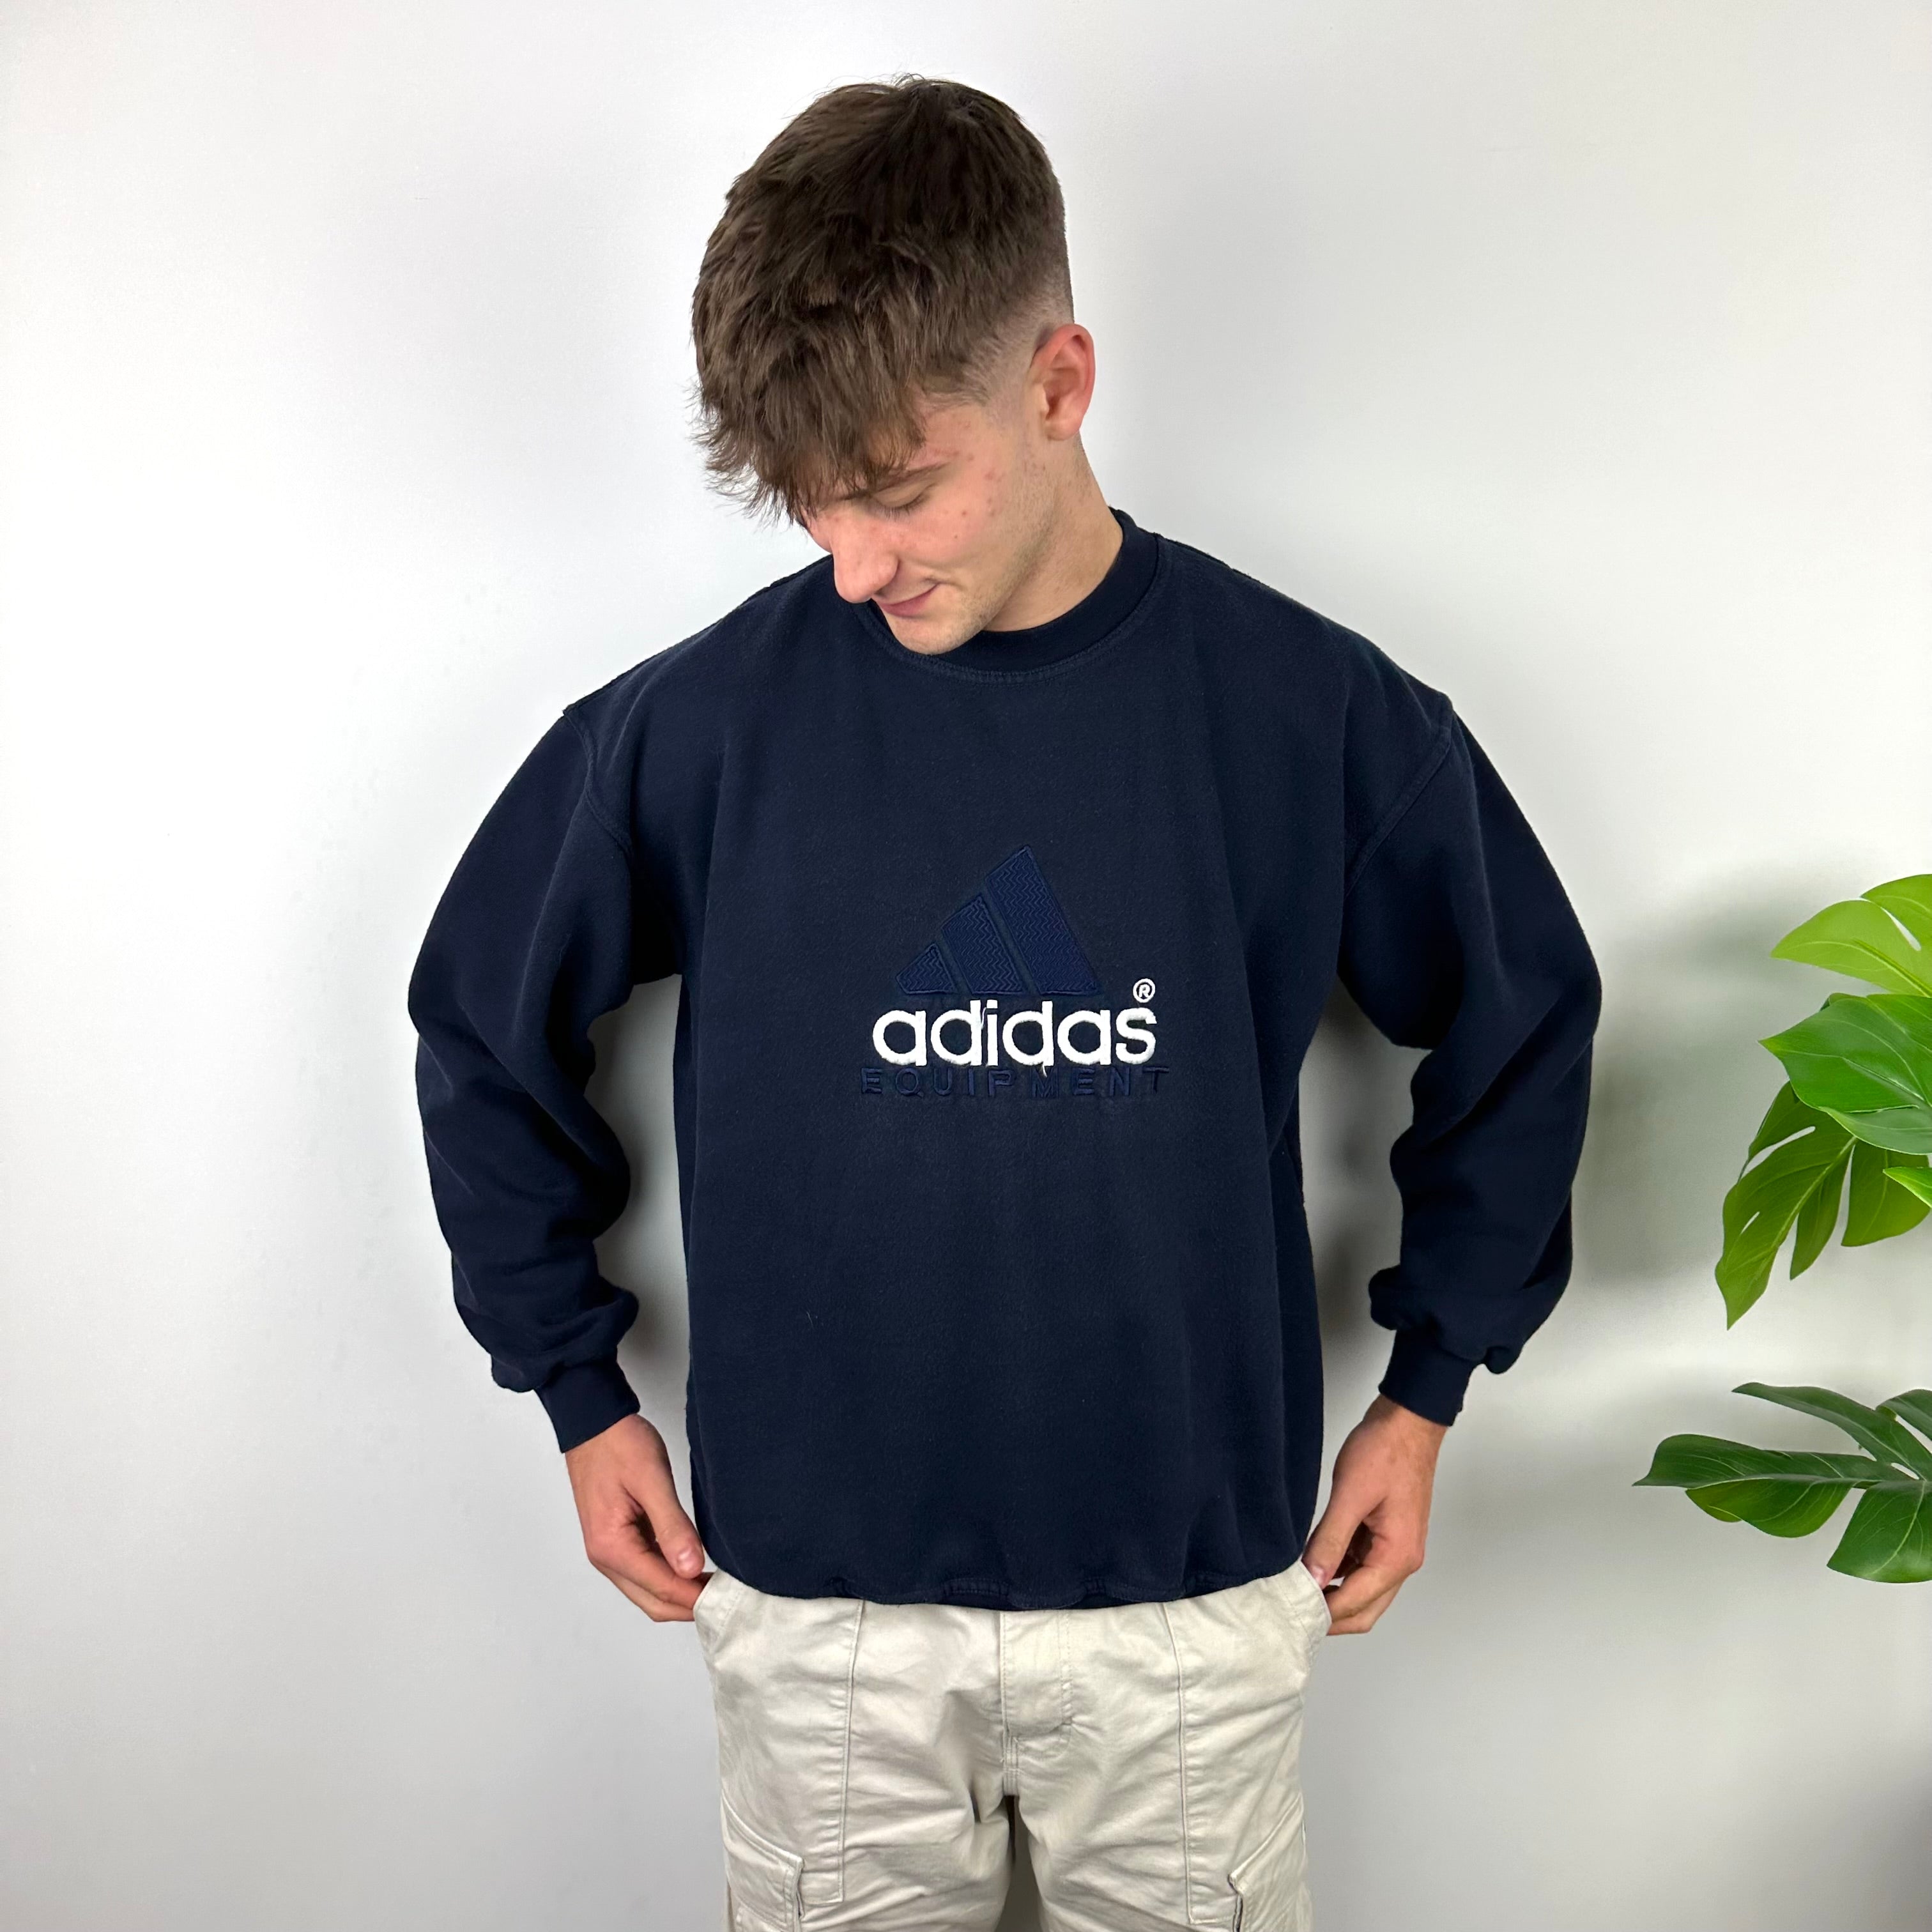 Adidas Equipment RARE Navy Embroidered Spell Out Sweatshirt (M)